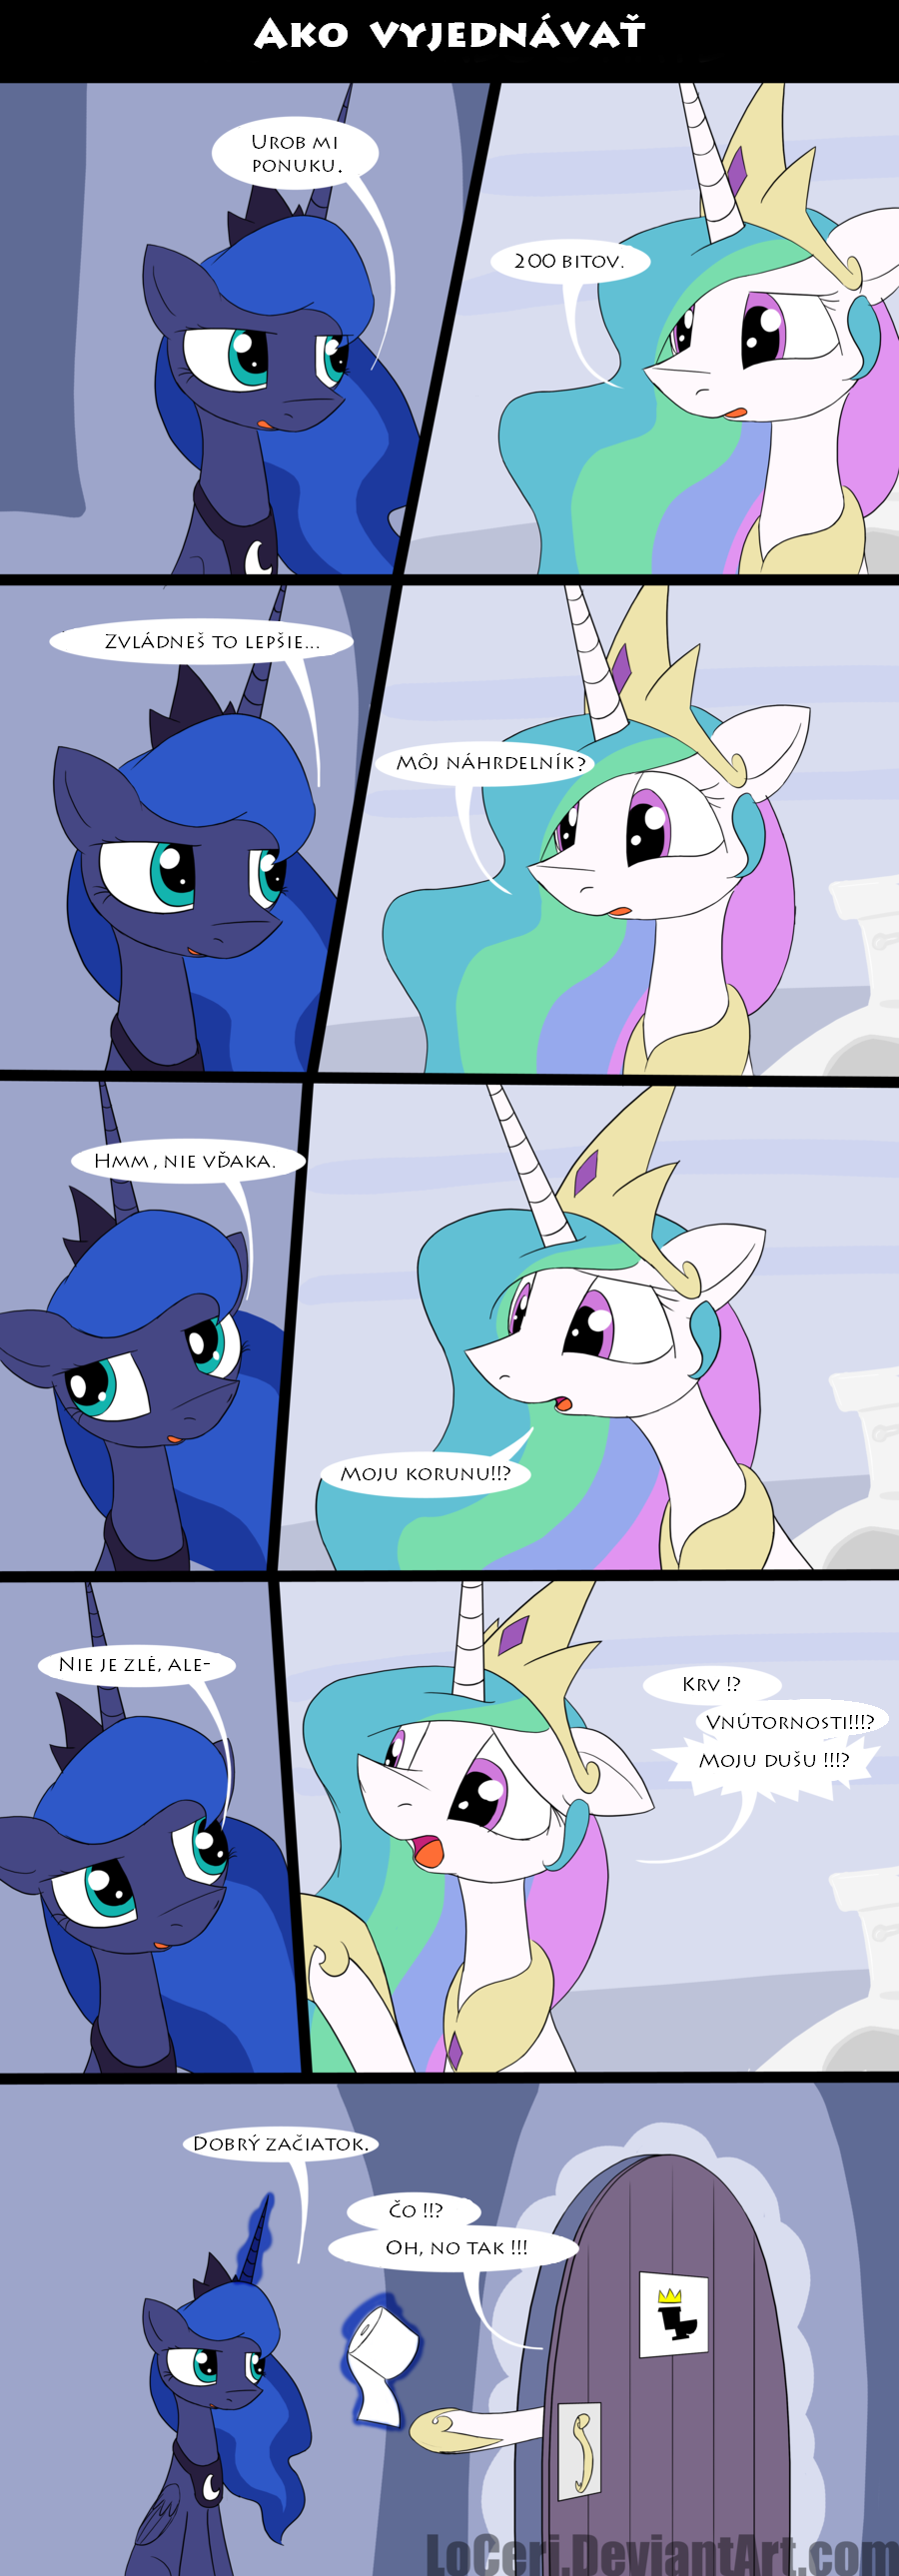 [Obrázek: mlp_how_to_negotiate_by_loceri_slovak_tr...73adqq.png]